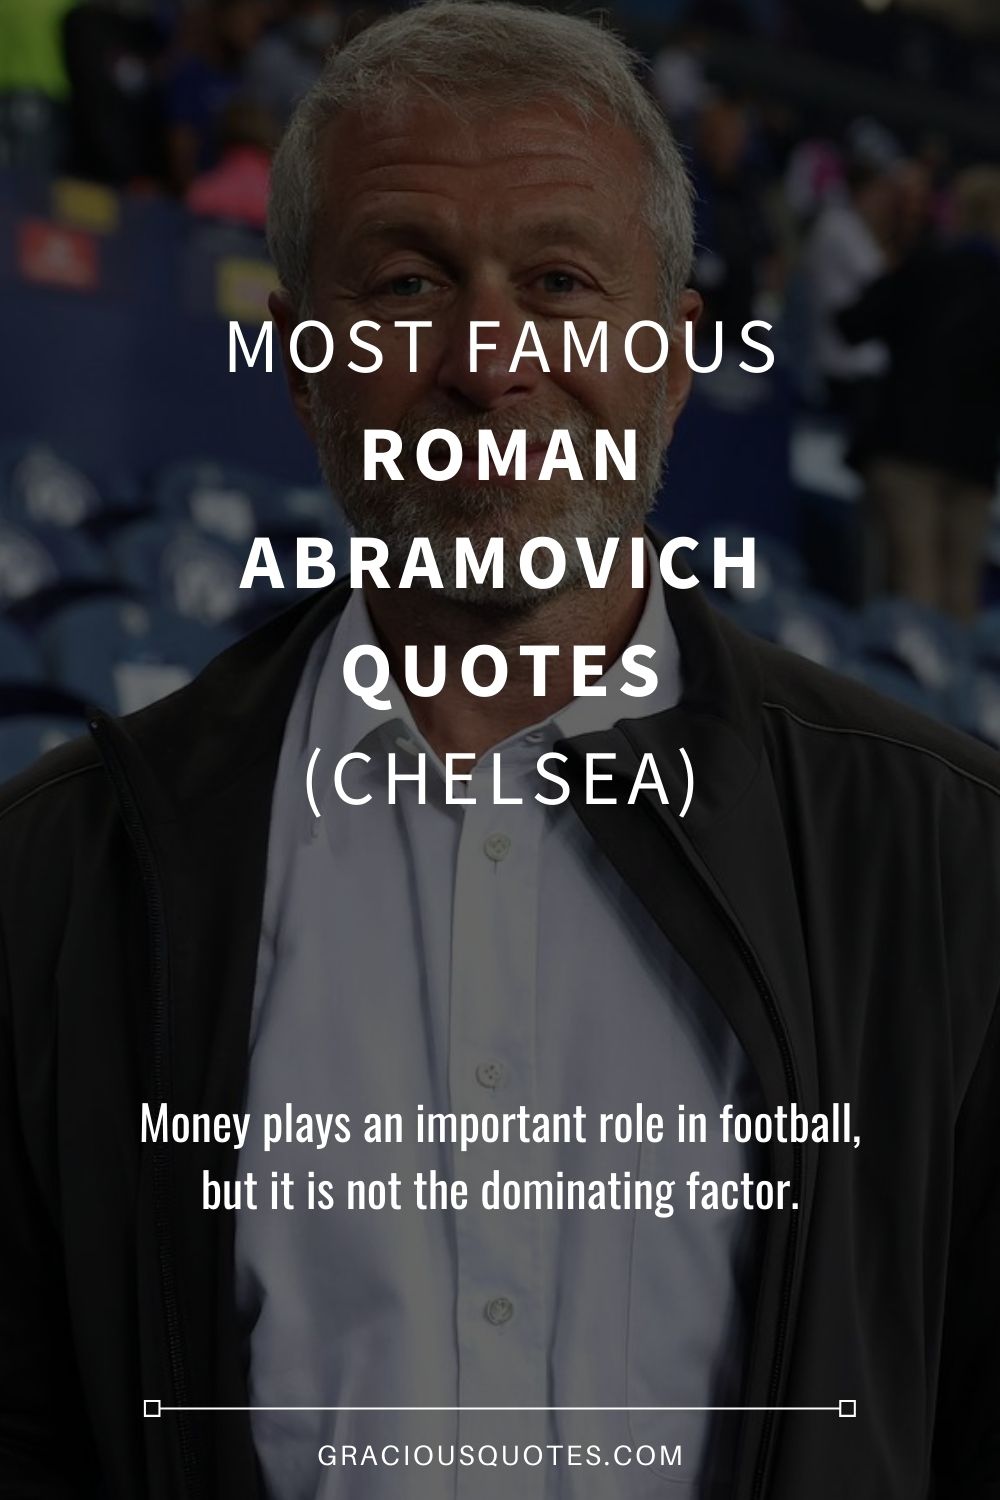 Most Famous Roman Abramovich Quotes (CHELSEA) - Gracious Quotes